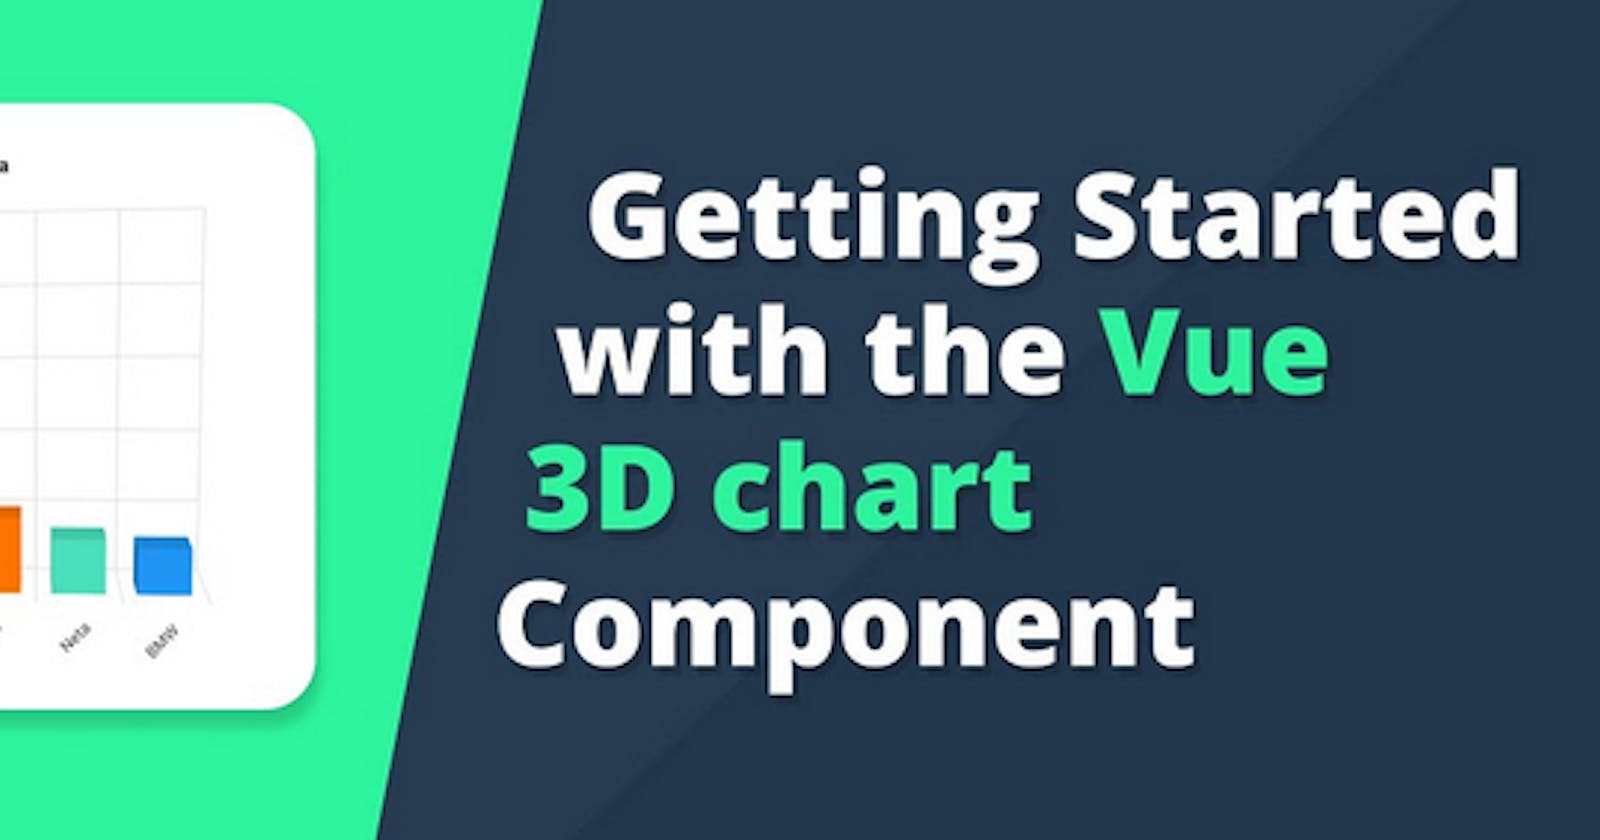 Getting Started with the Vue 3D Chart Component